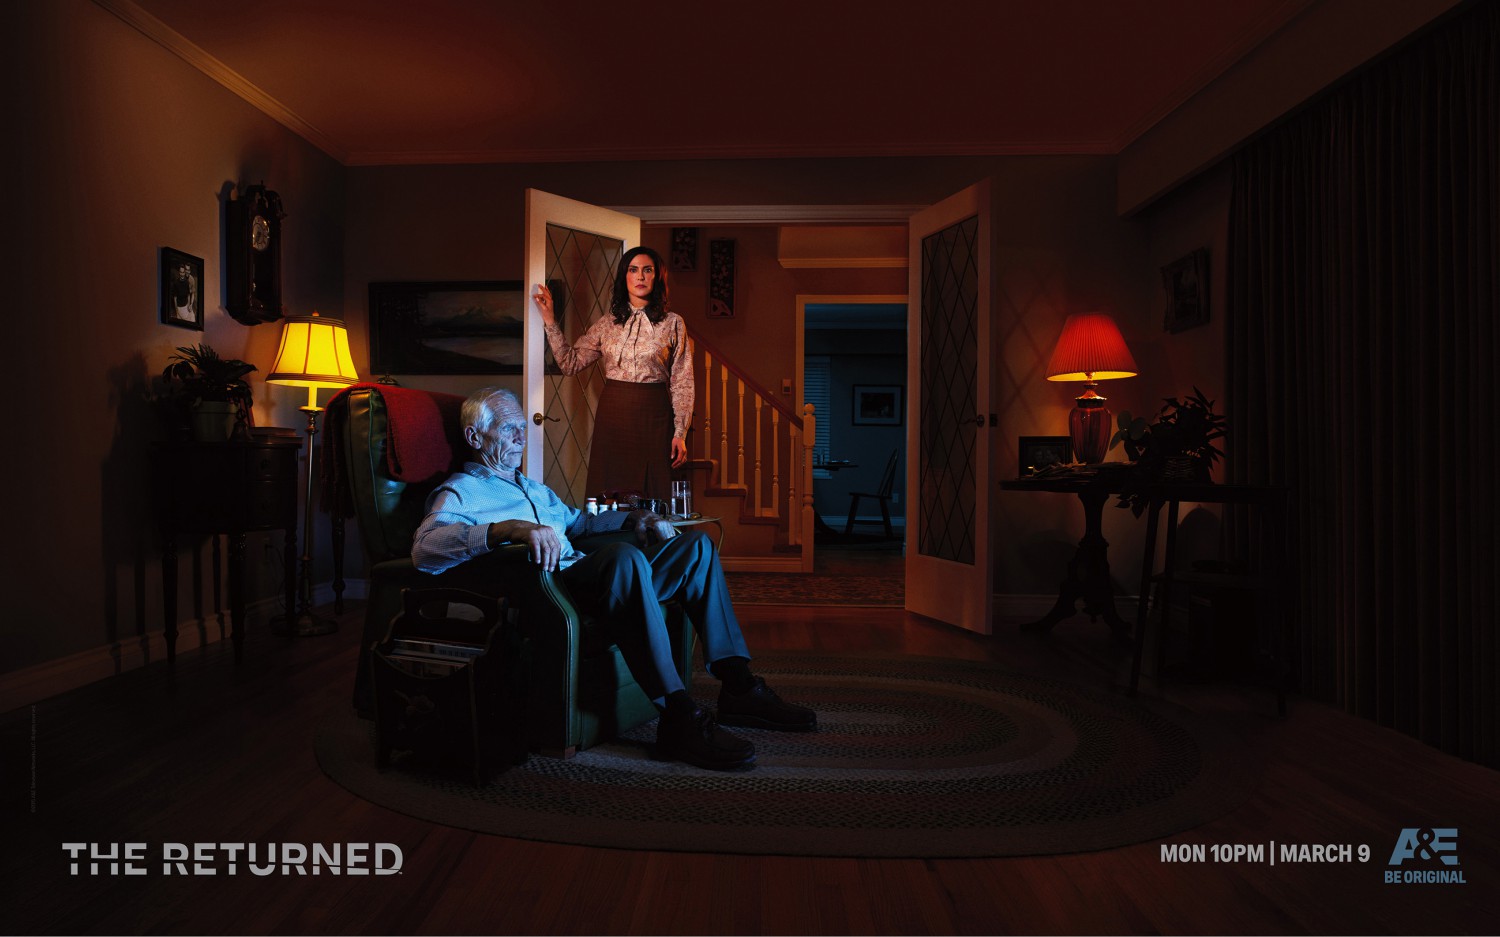 Extra Large TV Poster Image for The Returned (#4 of 8)